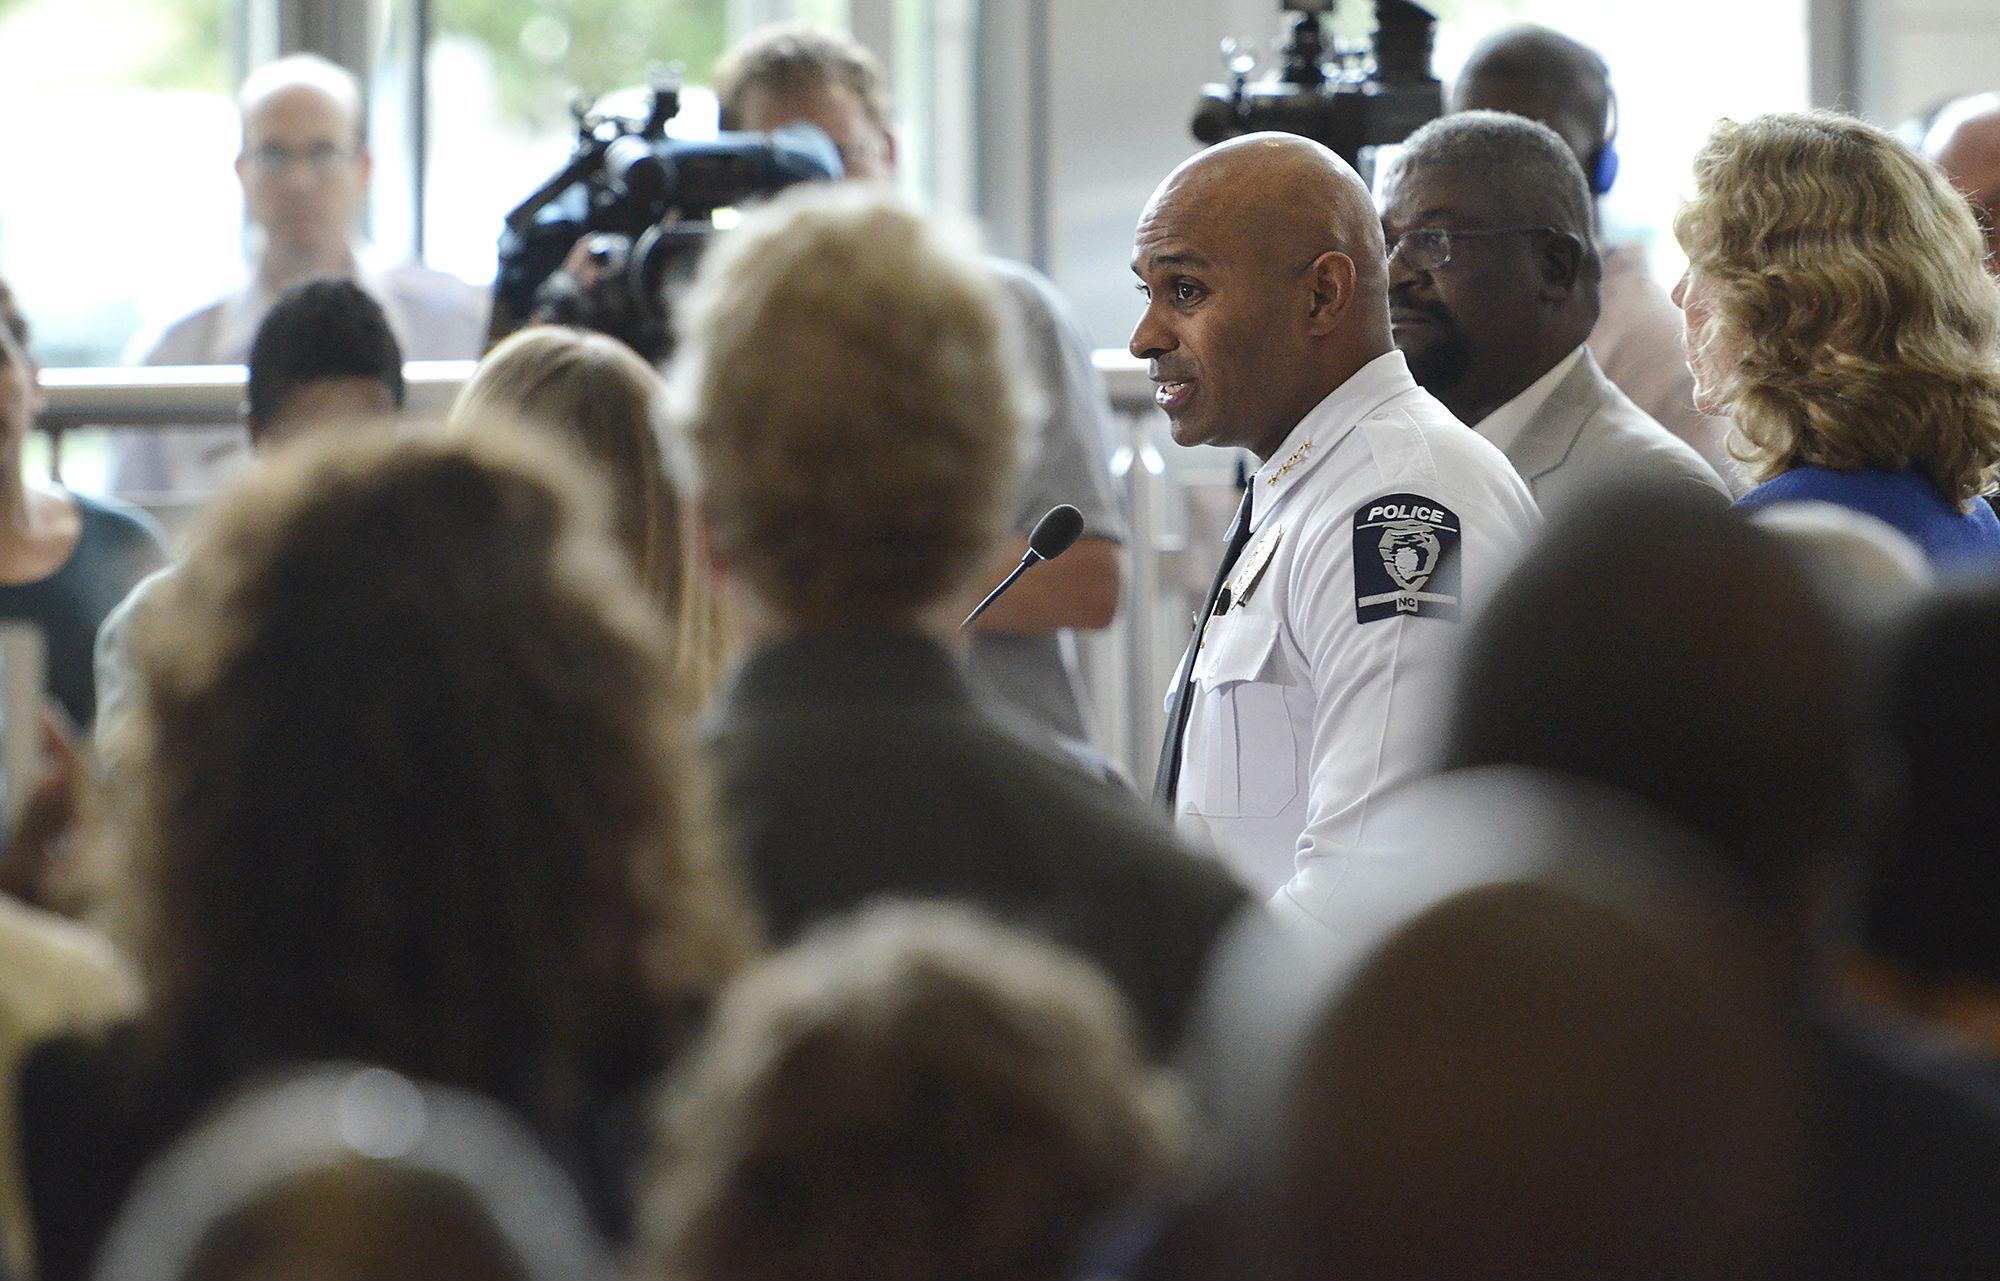 Charlotte-Mecklenburg Police Chief Kerr Putney said the victim had been armed